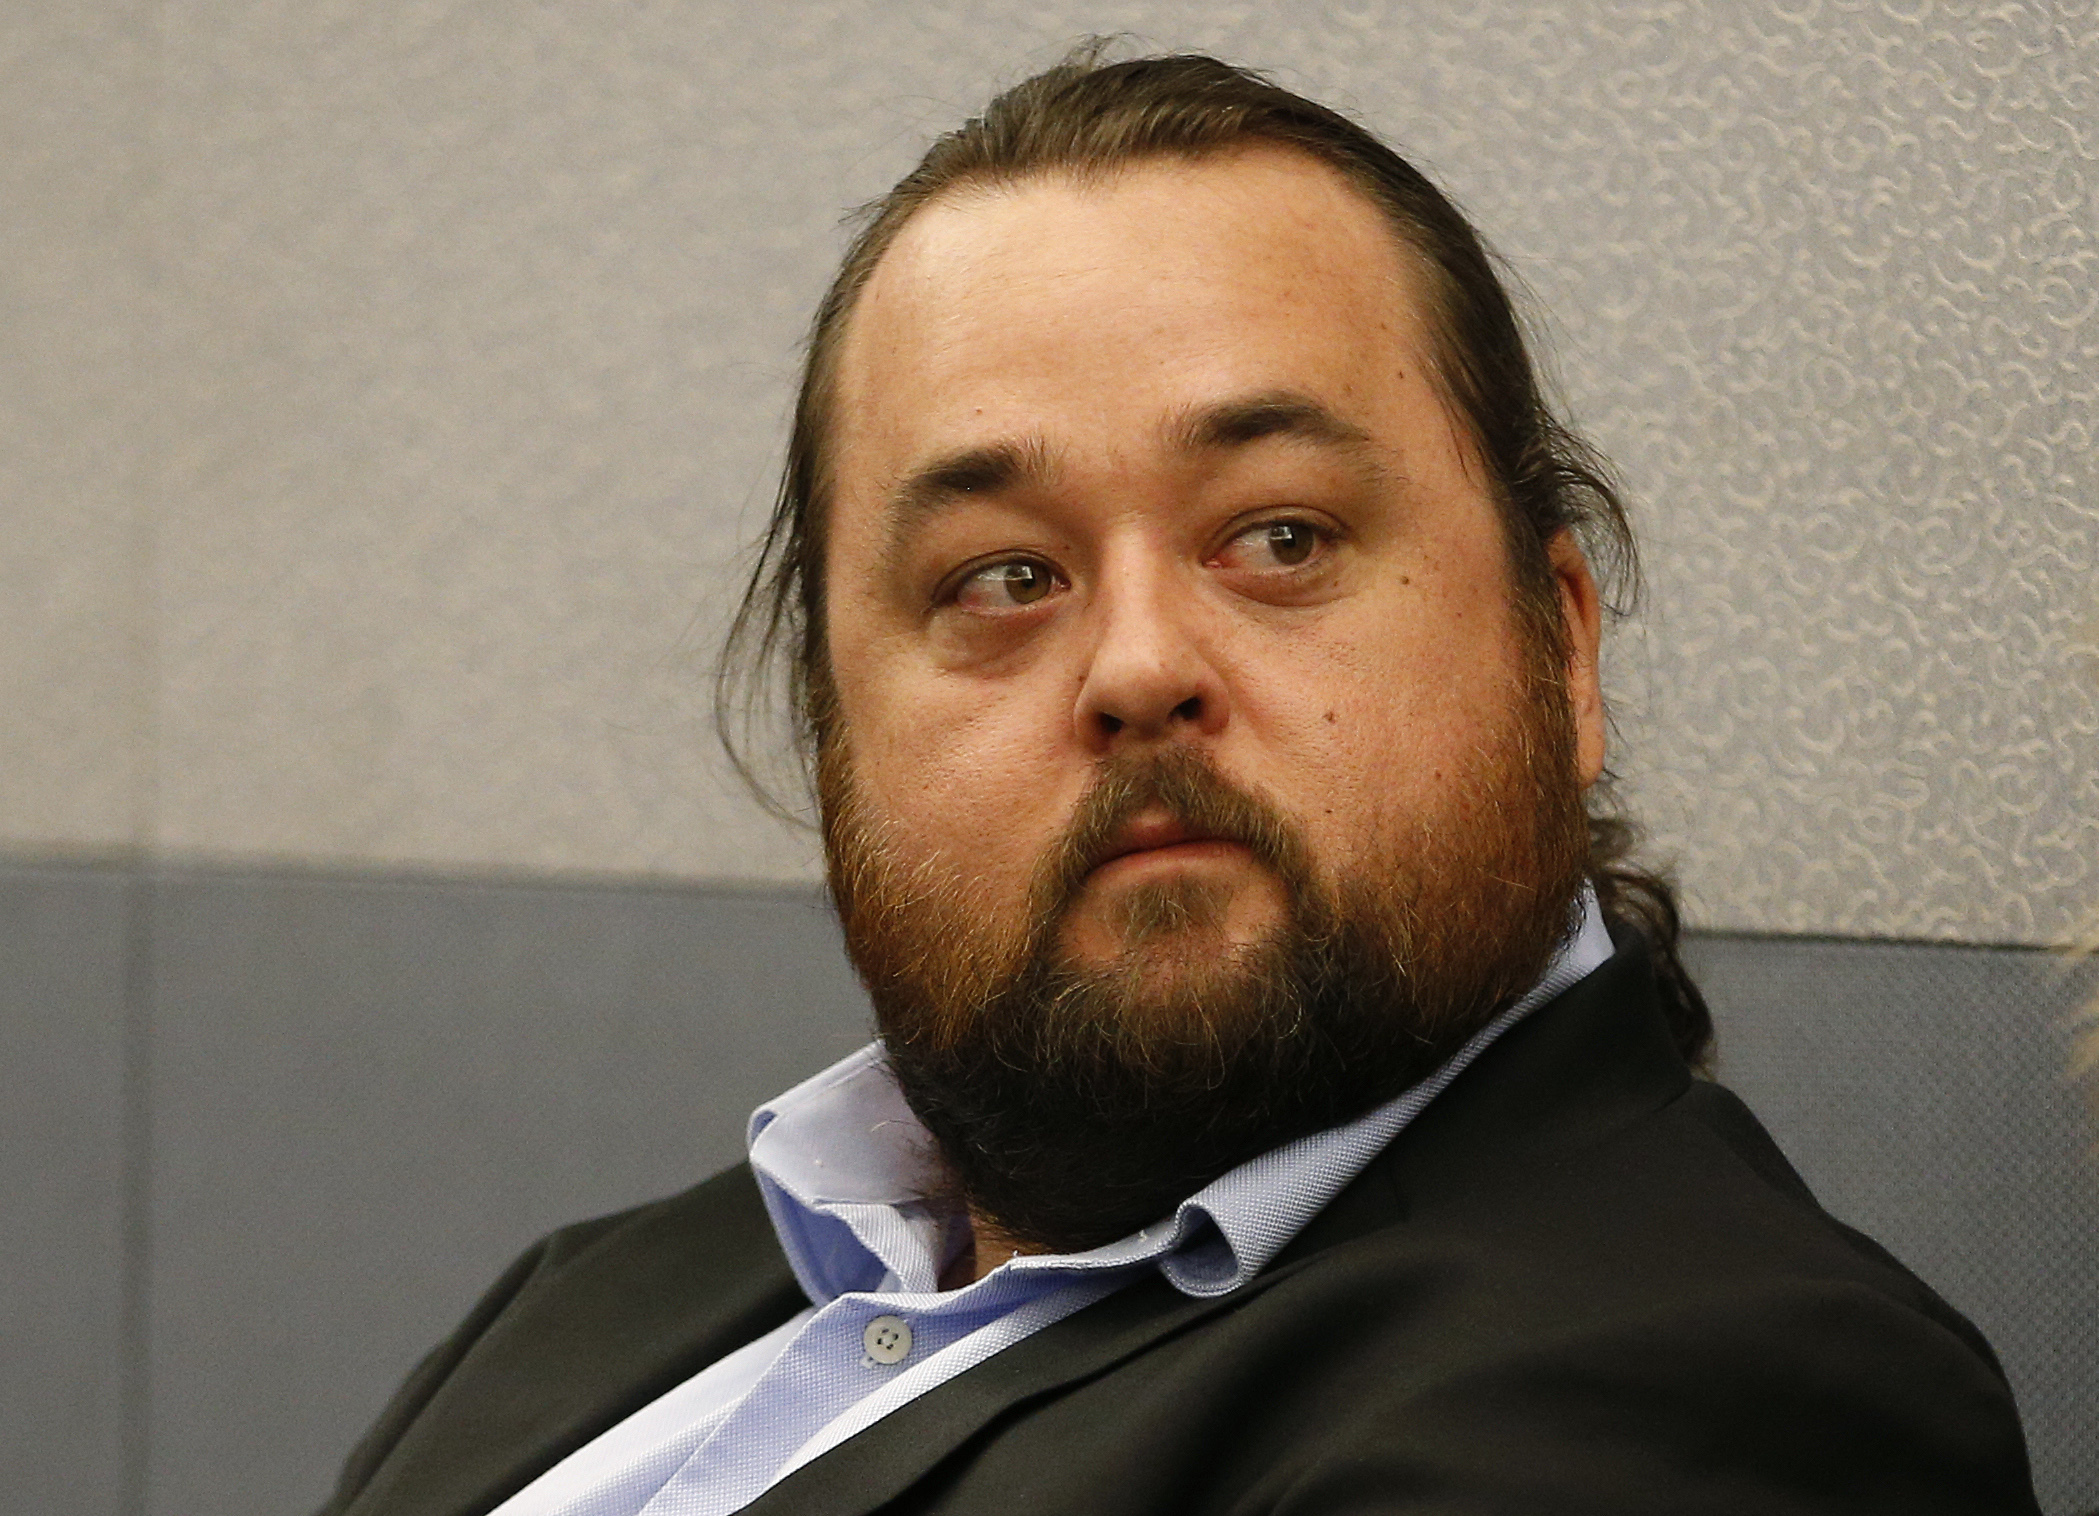 #39 Chumlee #39 of #39 Pawn Stars #39 won #39 t see jail on guns drugs charges